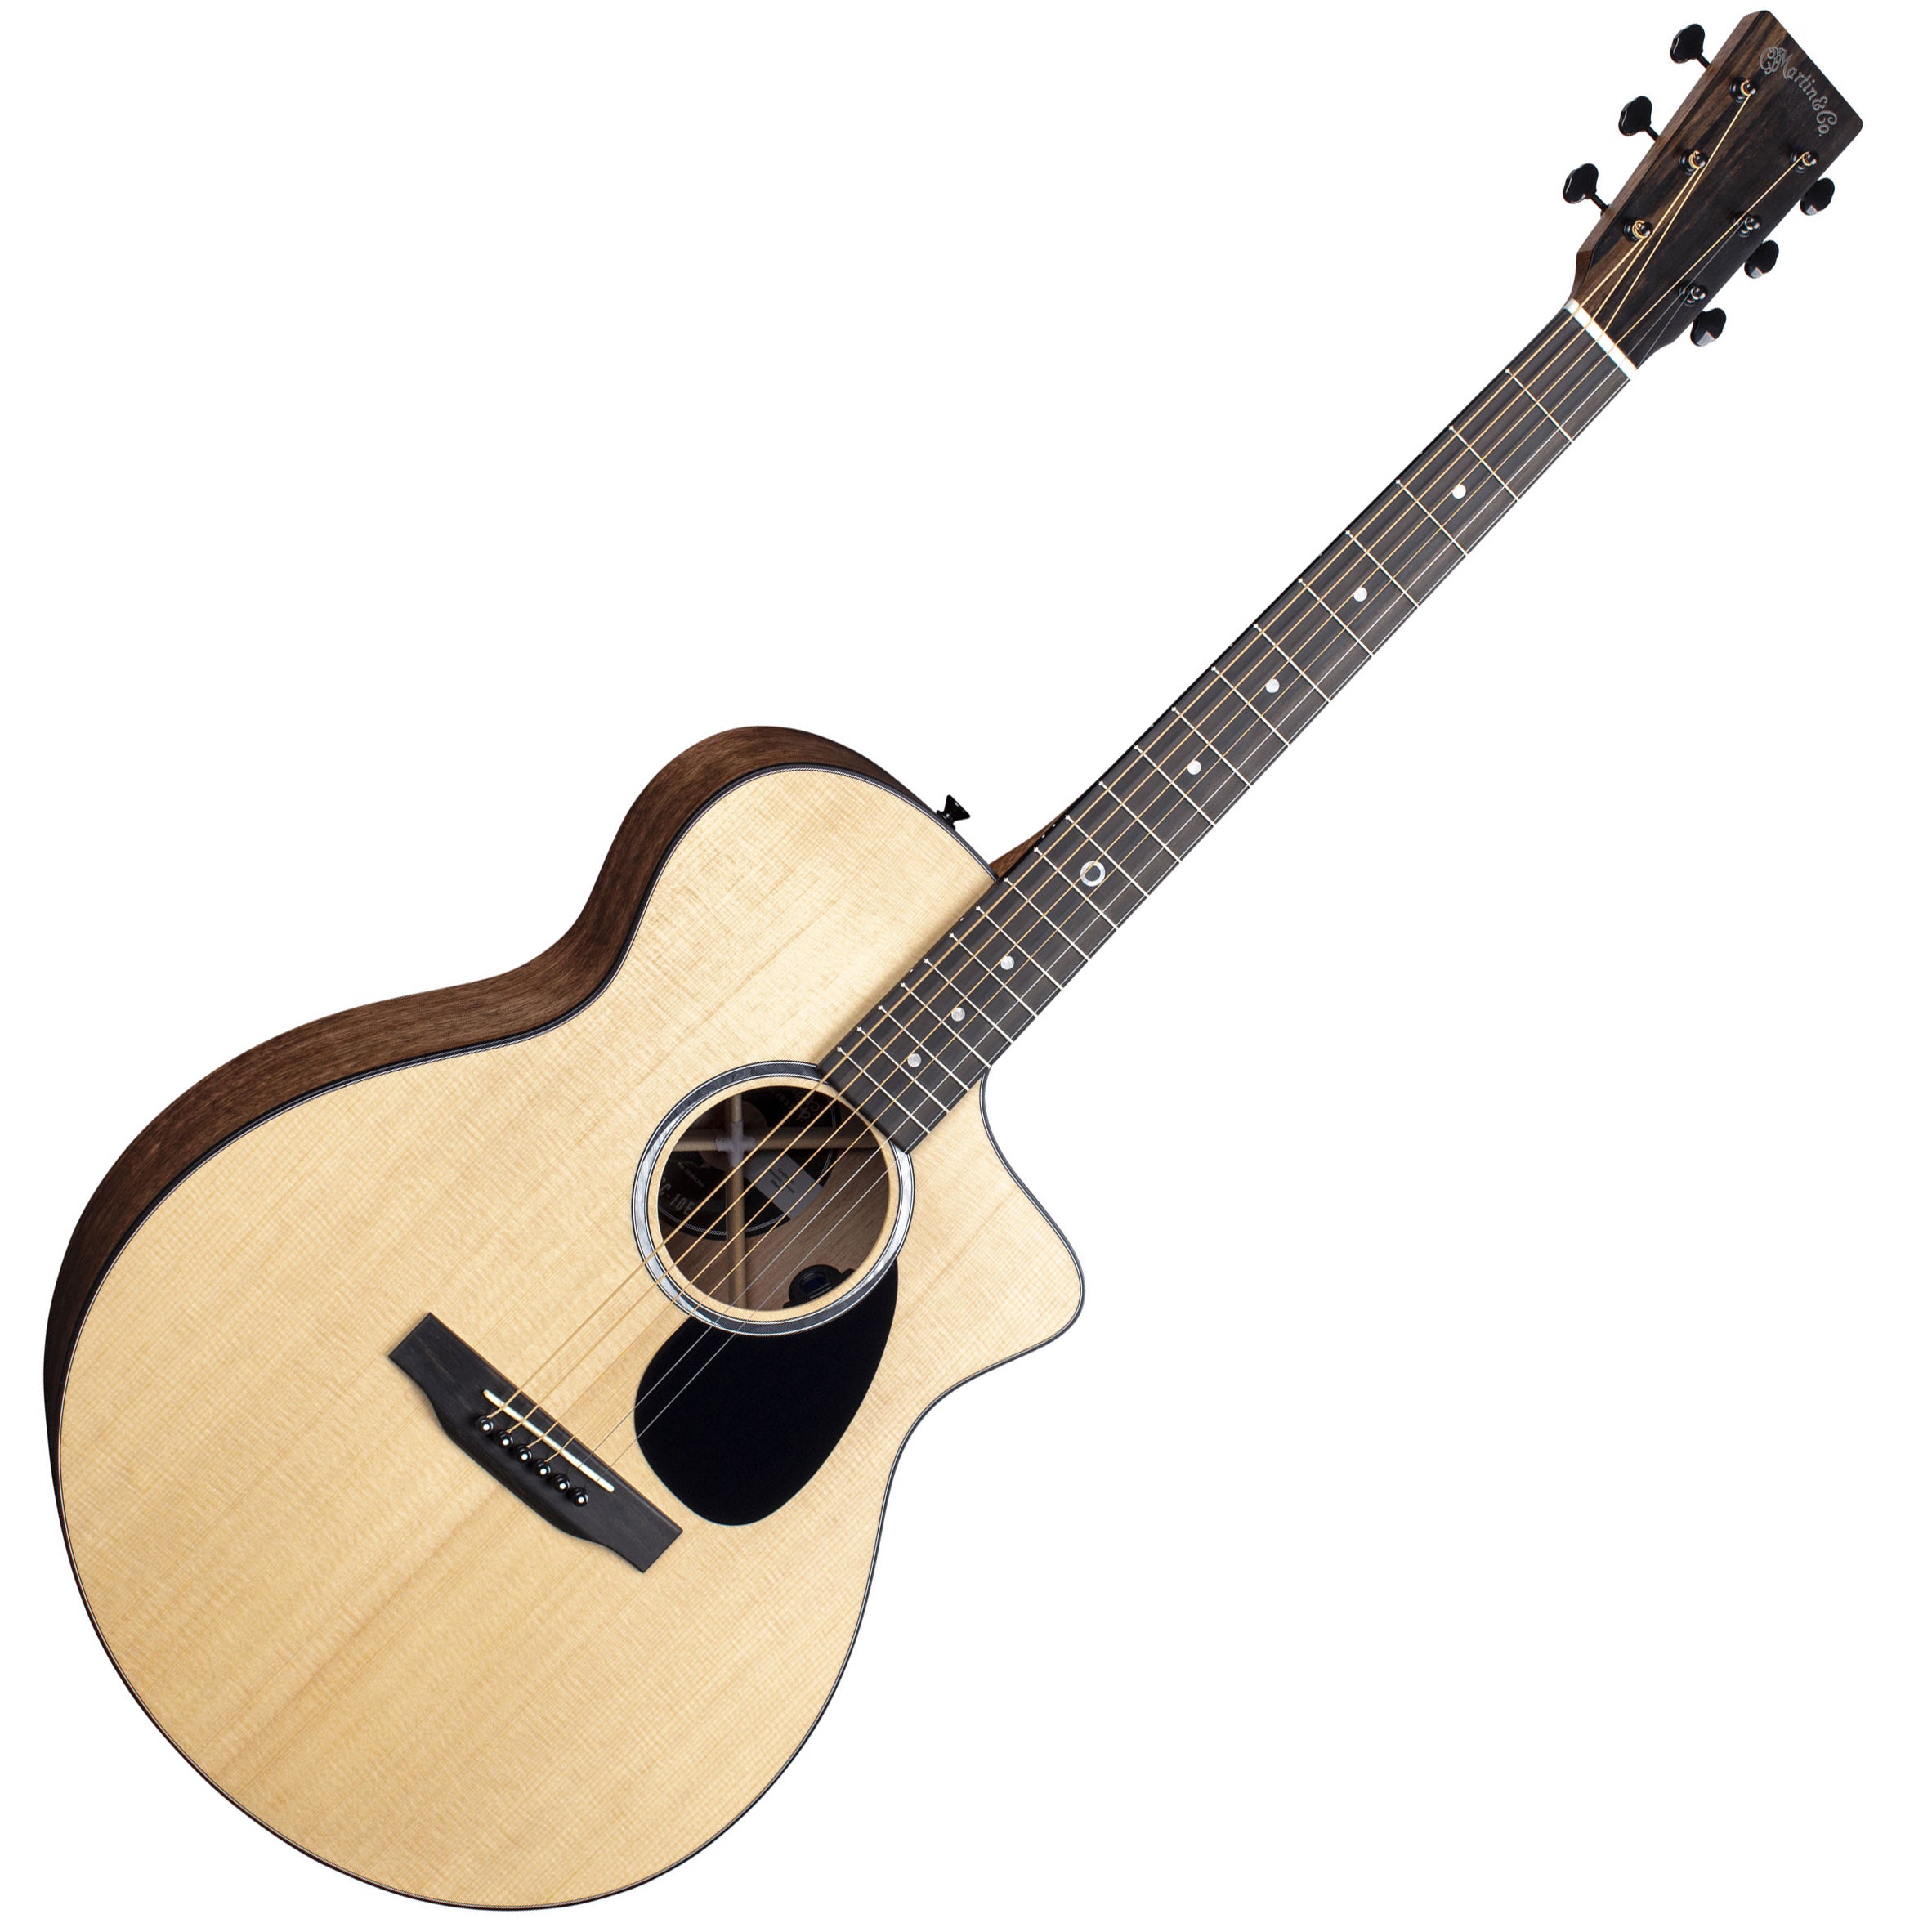 Martin Sc-10e Road Series 6-string Acoustic-electric Guitar - Natural 